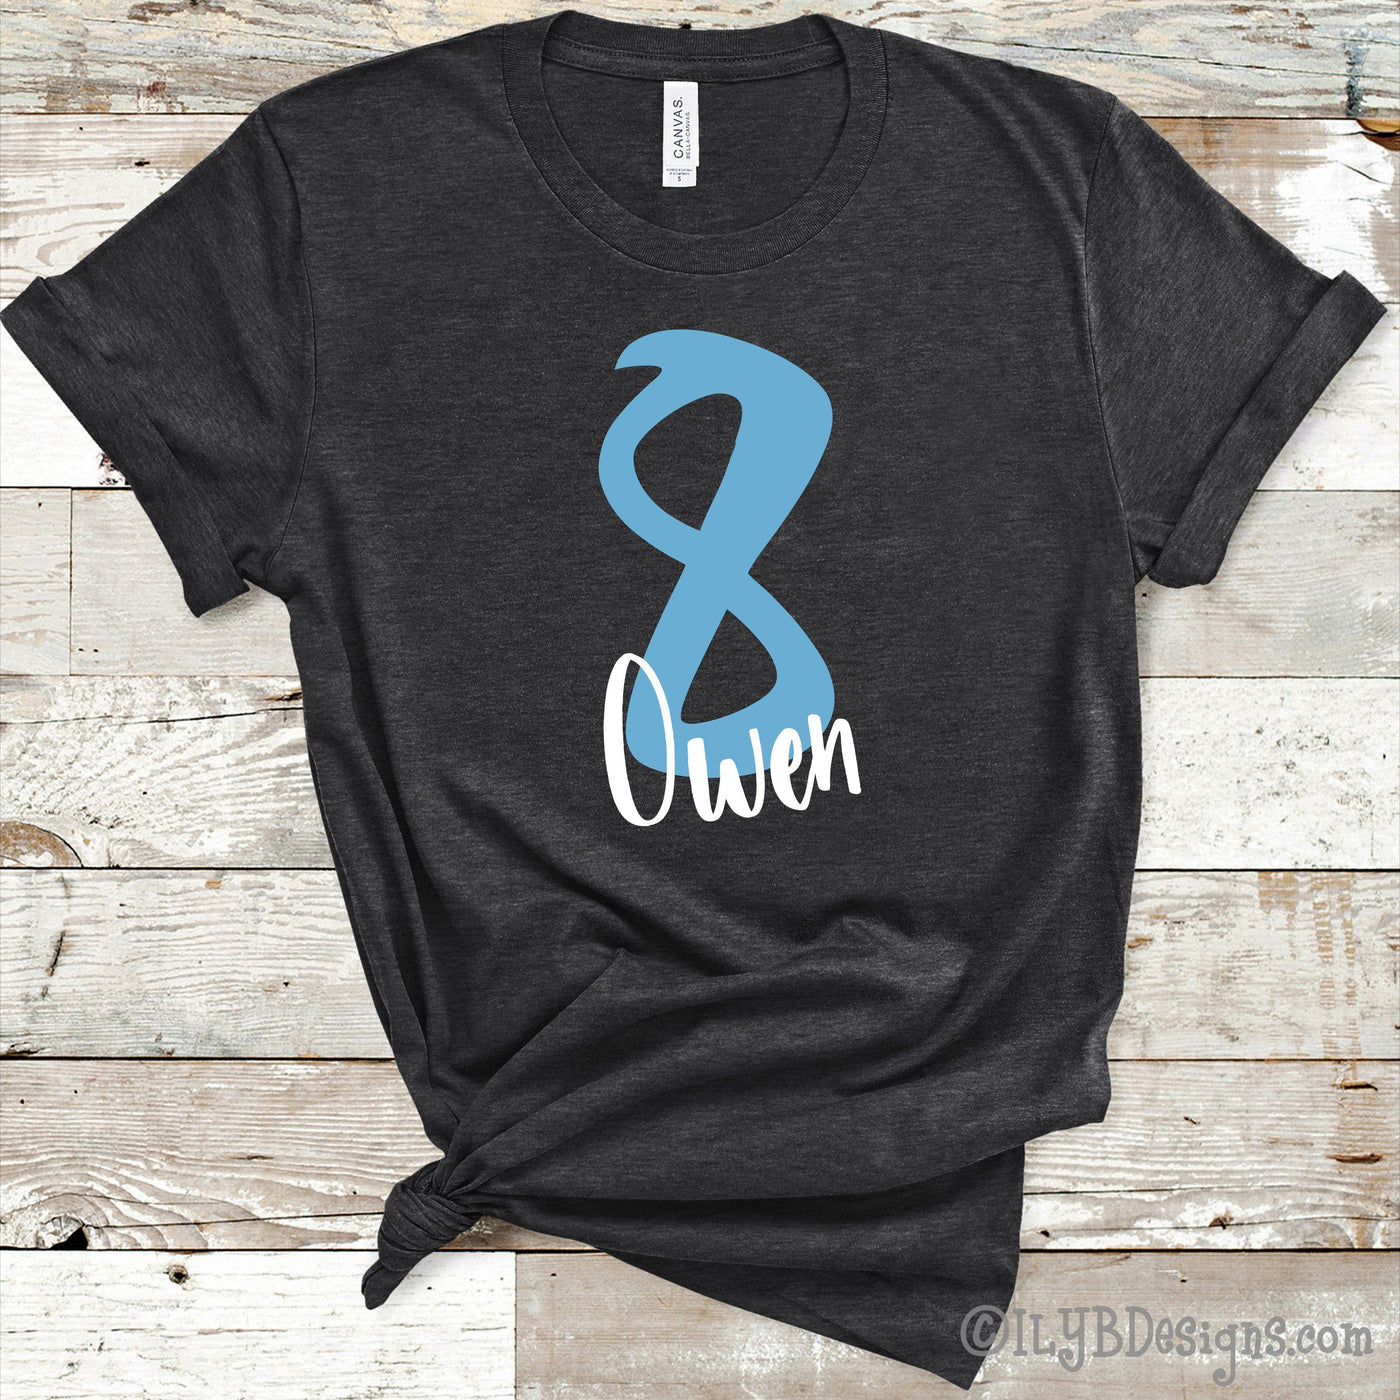 Birthday Shirt Personalized with Age & Child's Name - Custom Birthday Shirt for Any Age - ILYB Designs